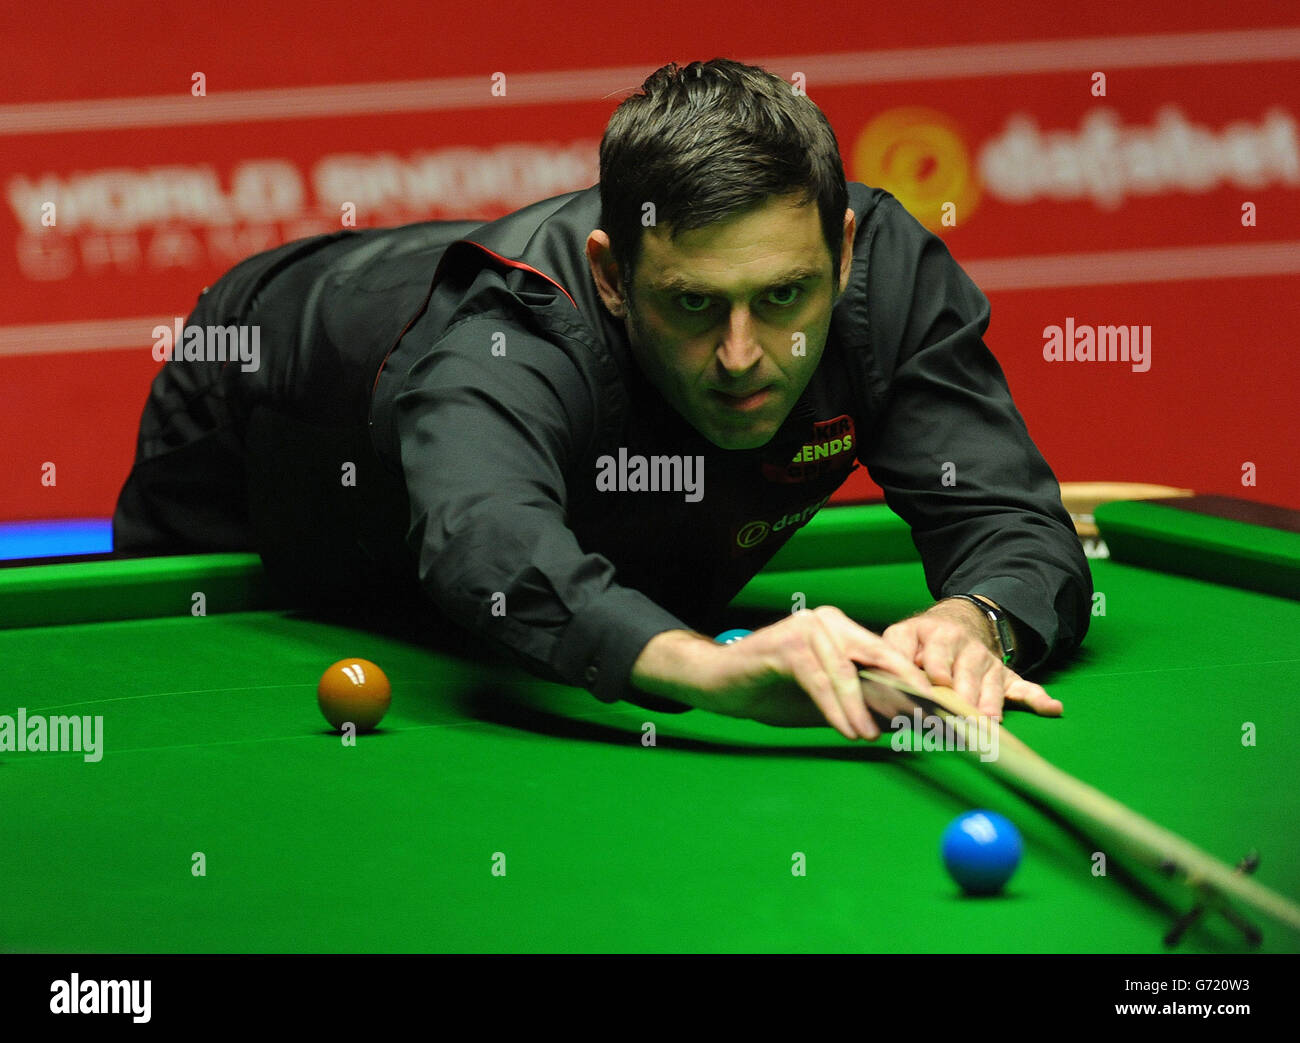 Ronnie OSullivan in action during the final session of the Dafabet World Snooker Championships at The Crucible, Sheffield Stock Photo